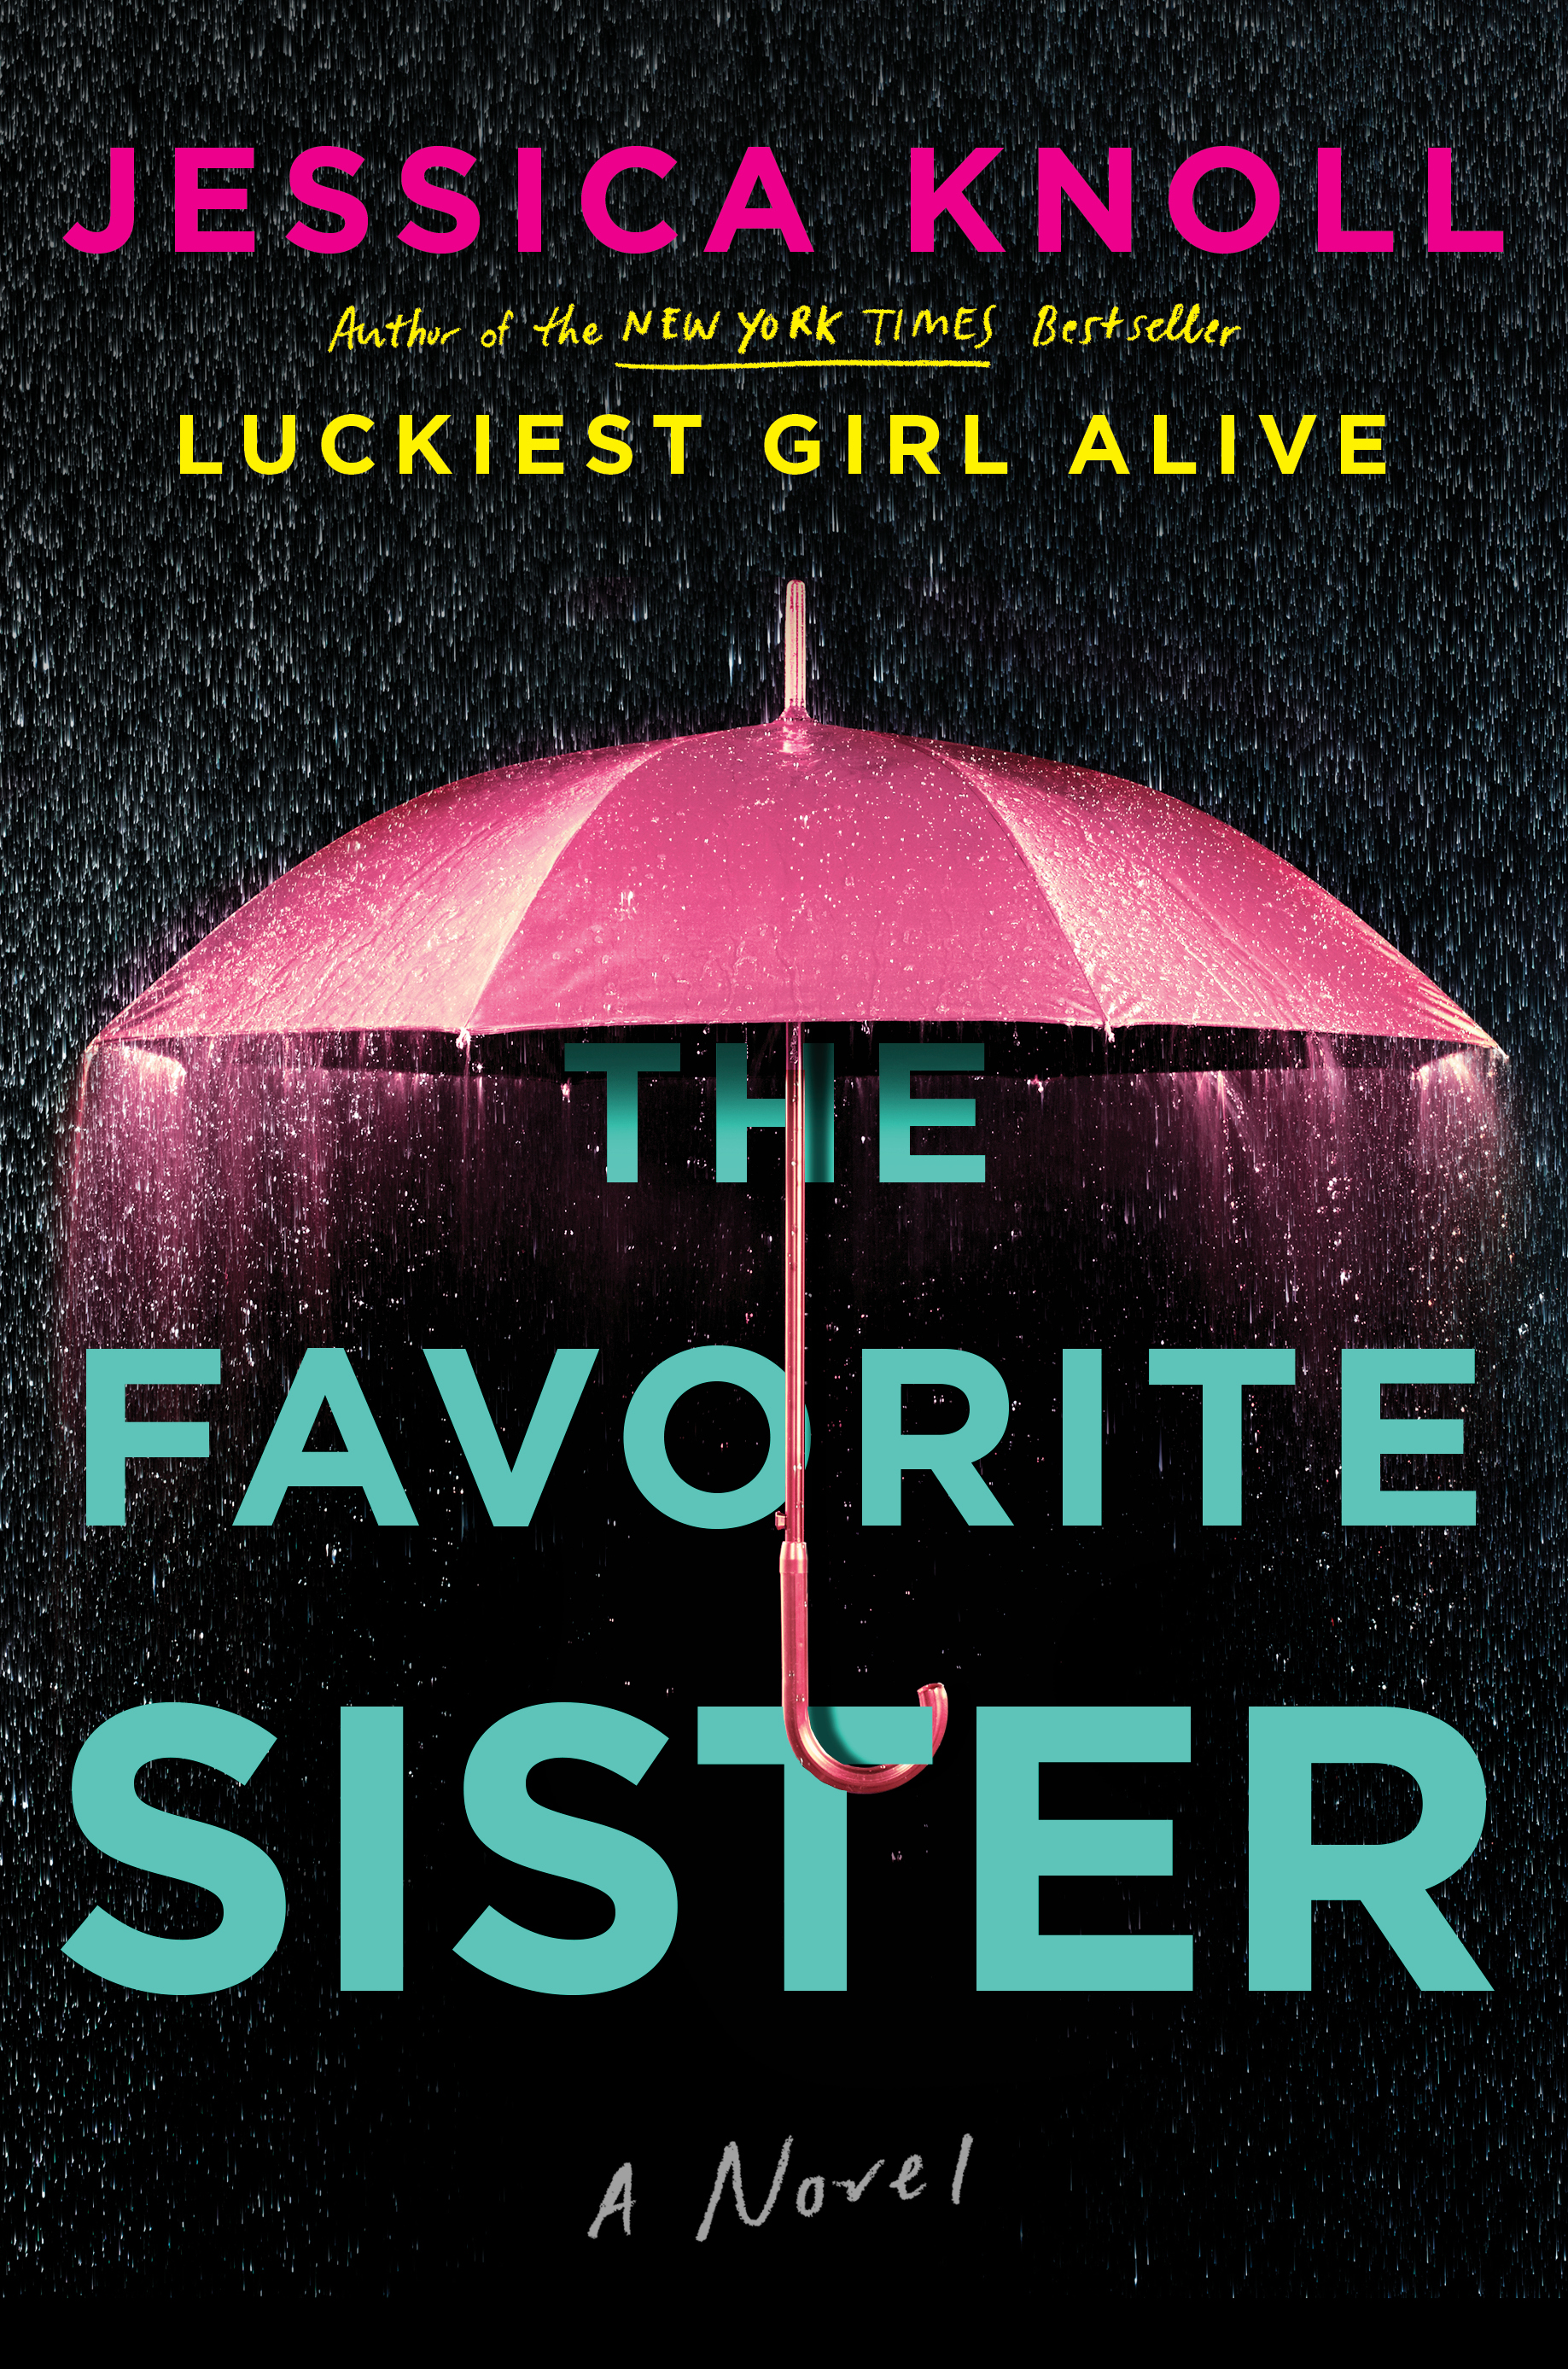 The Favorite Sister by Jessica Knoll book jacket